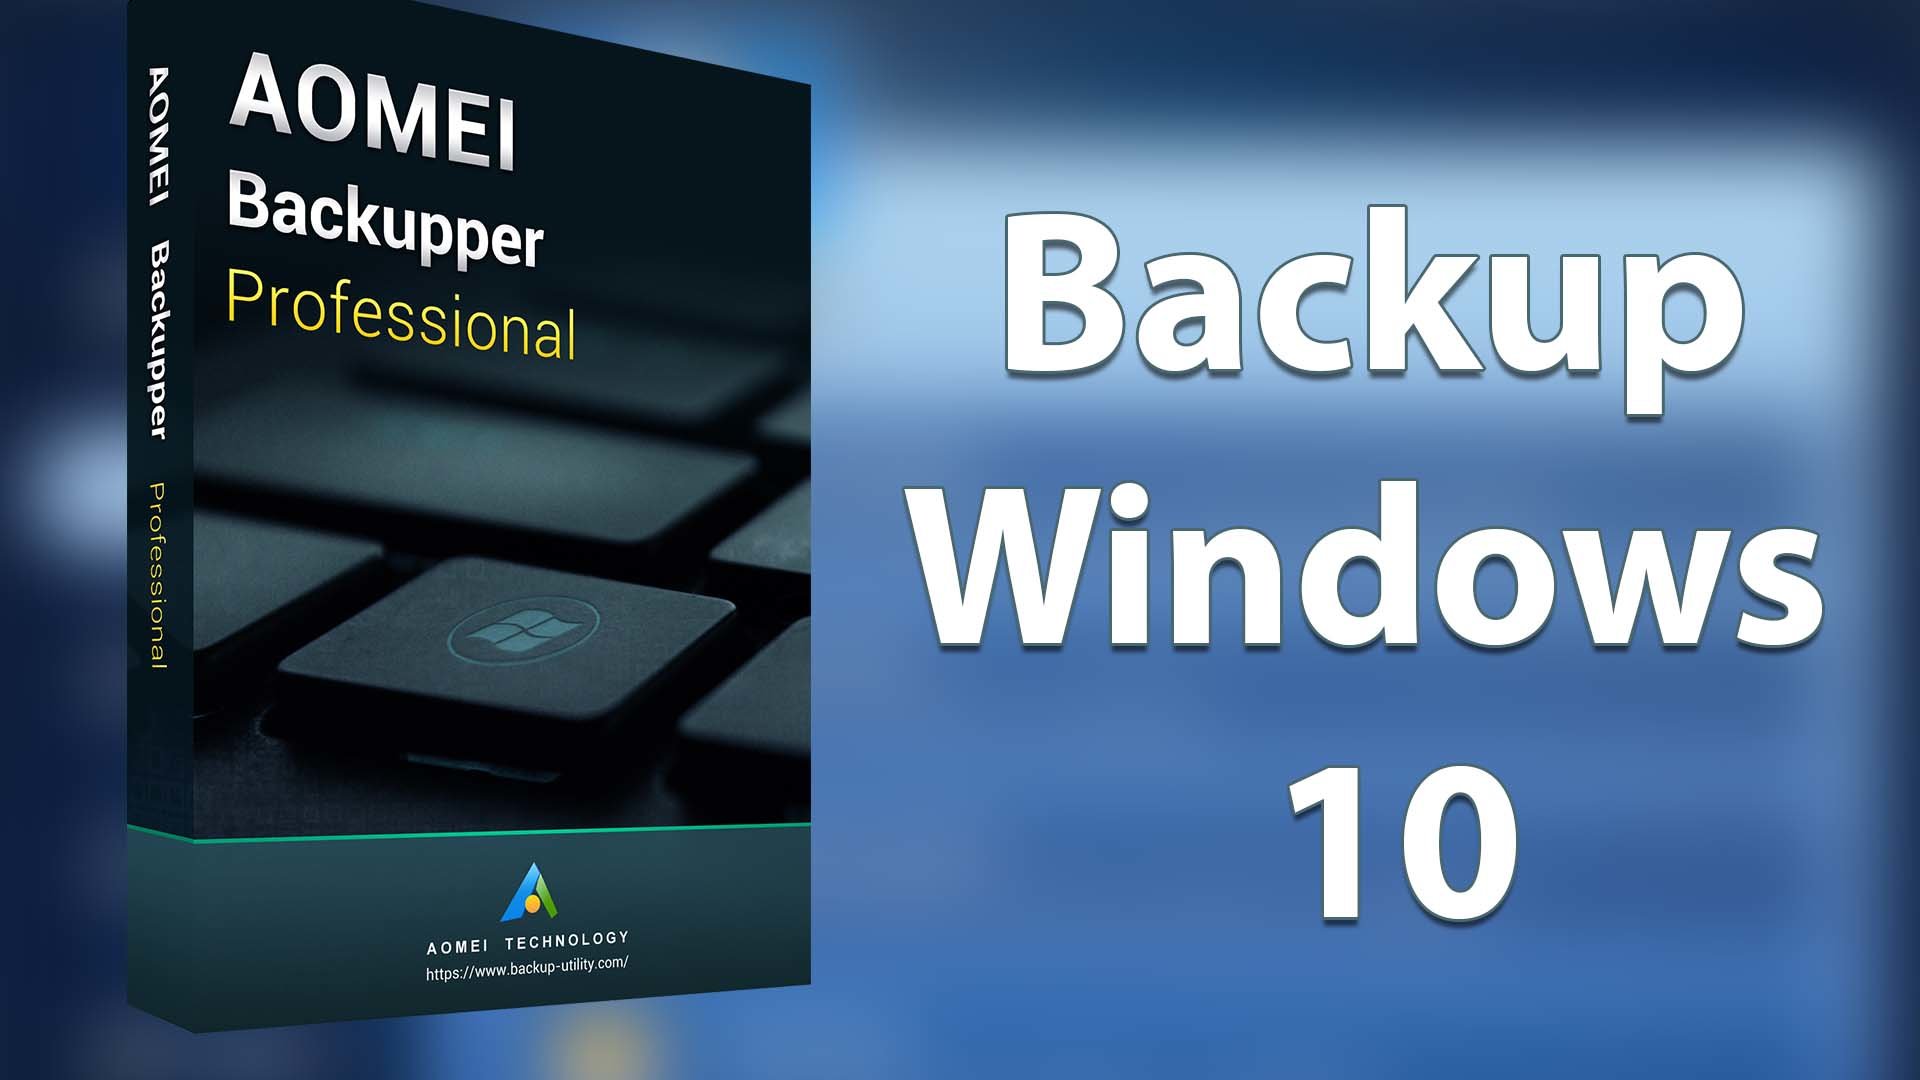 How to Backup Windows 10 to External Disk Via AOMEI Backupper